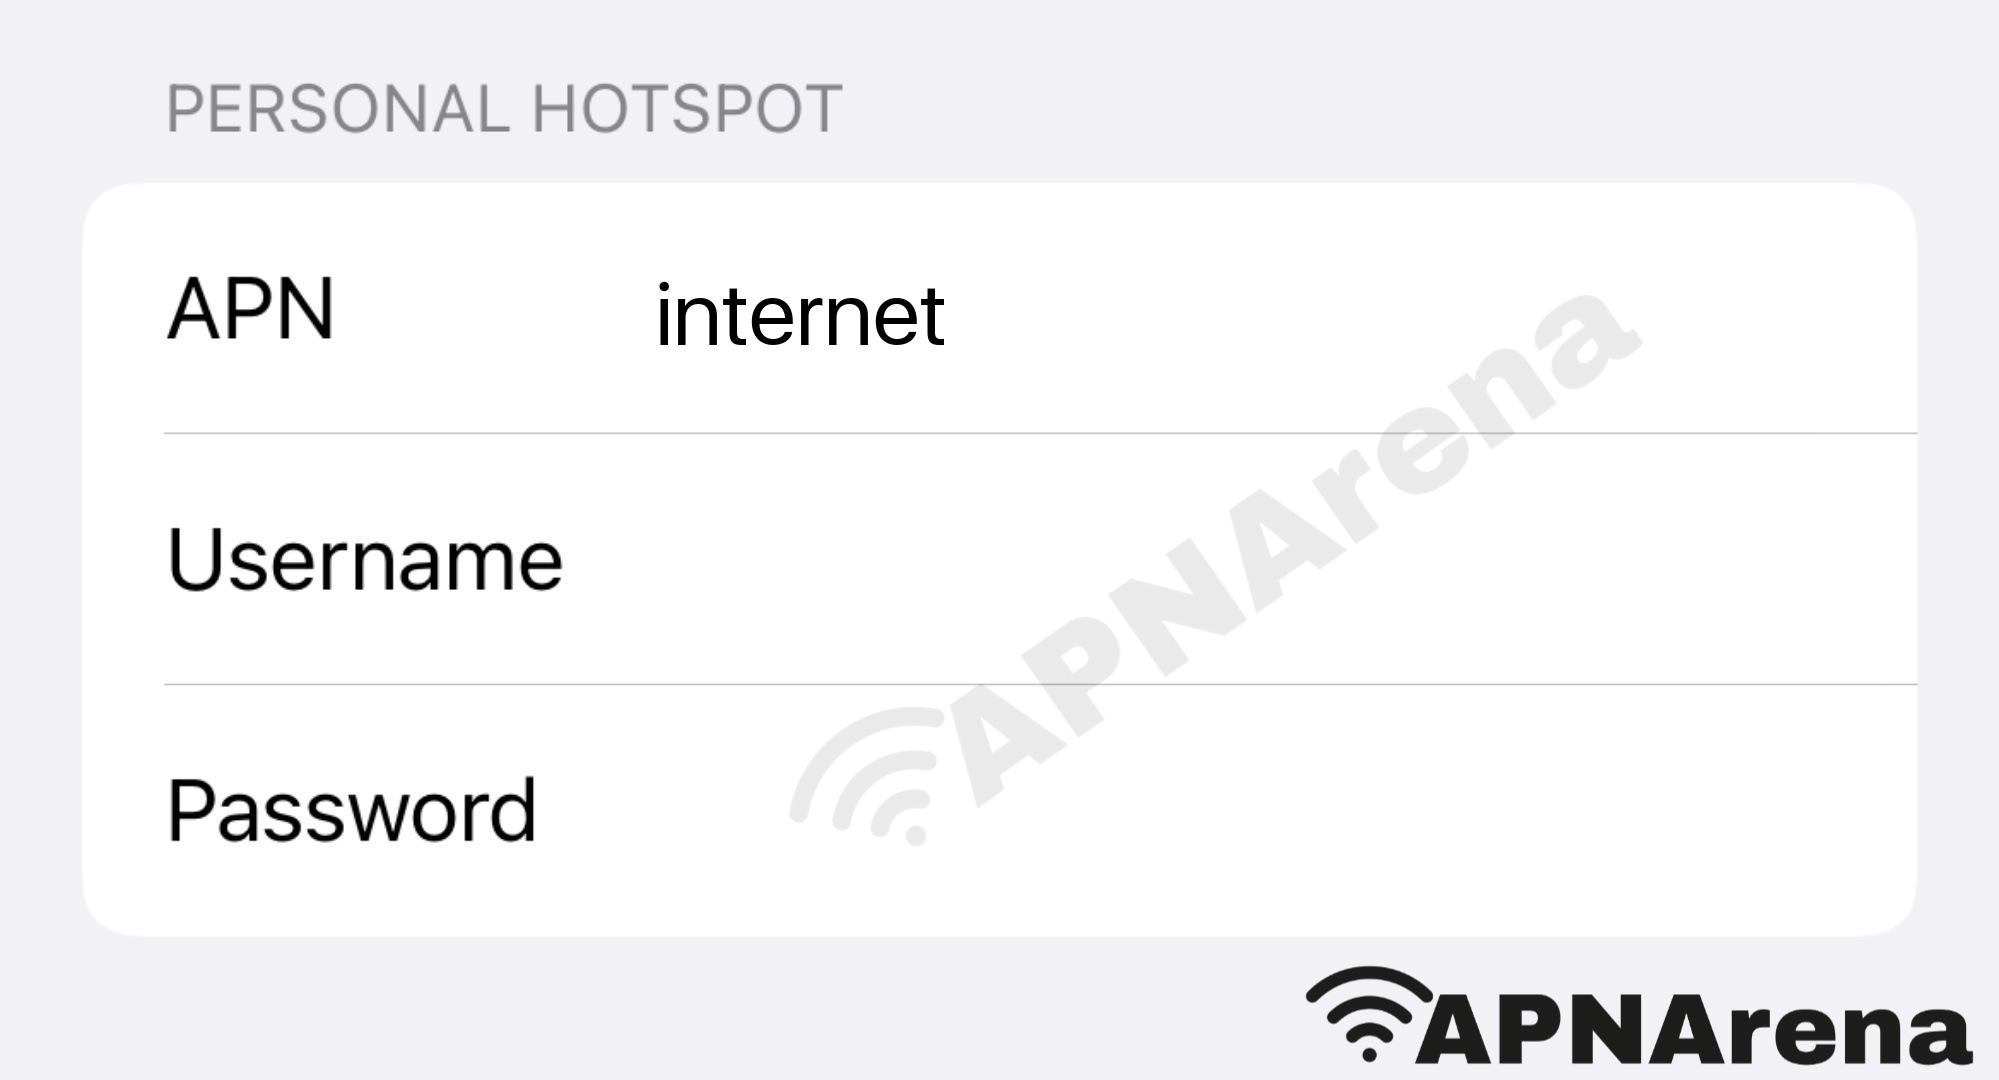 G-Mobile Malawi Personal Hotspot Settings for iPhone